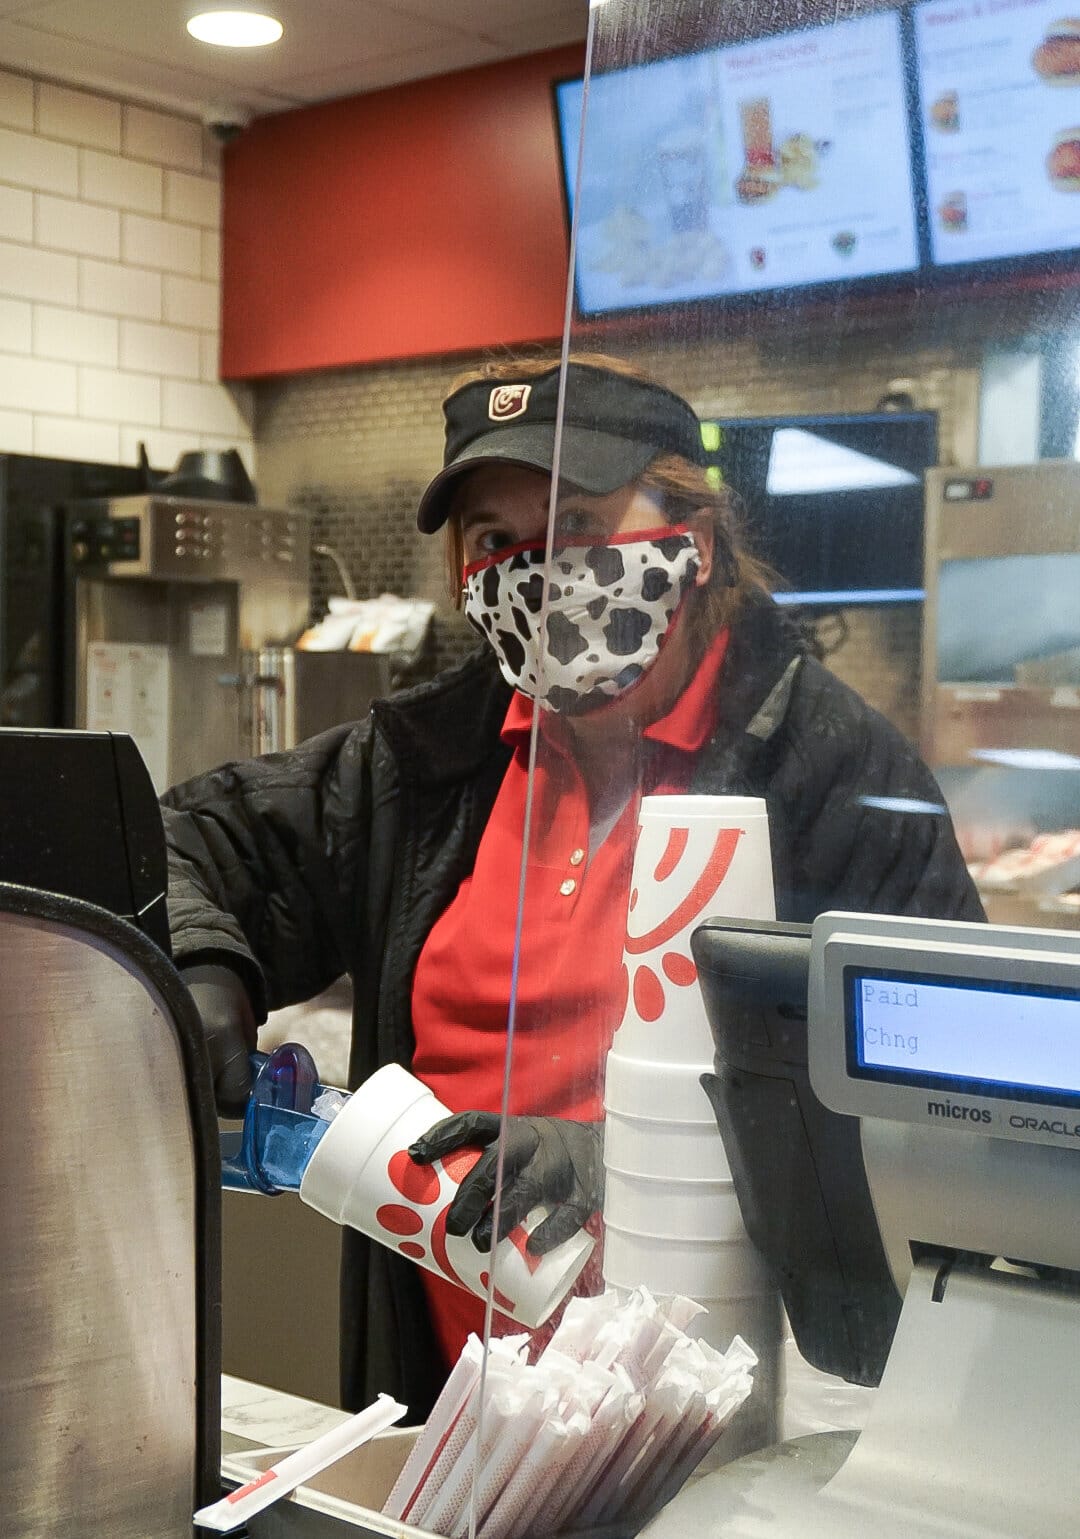 Meet Bonnie. Bonnie works at the front for the campus Chick-fil-A.